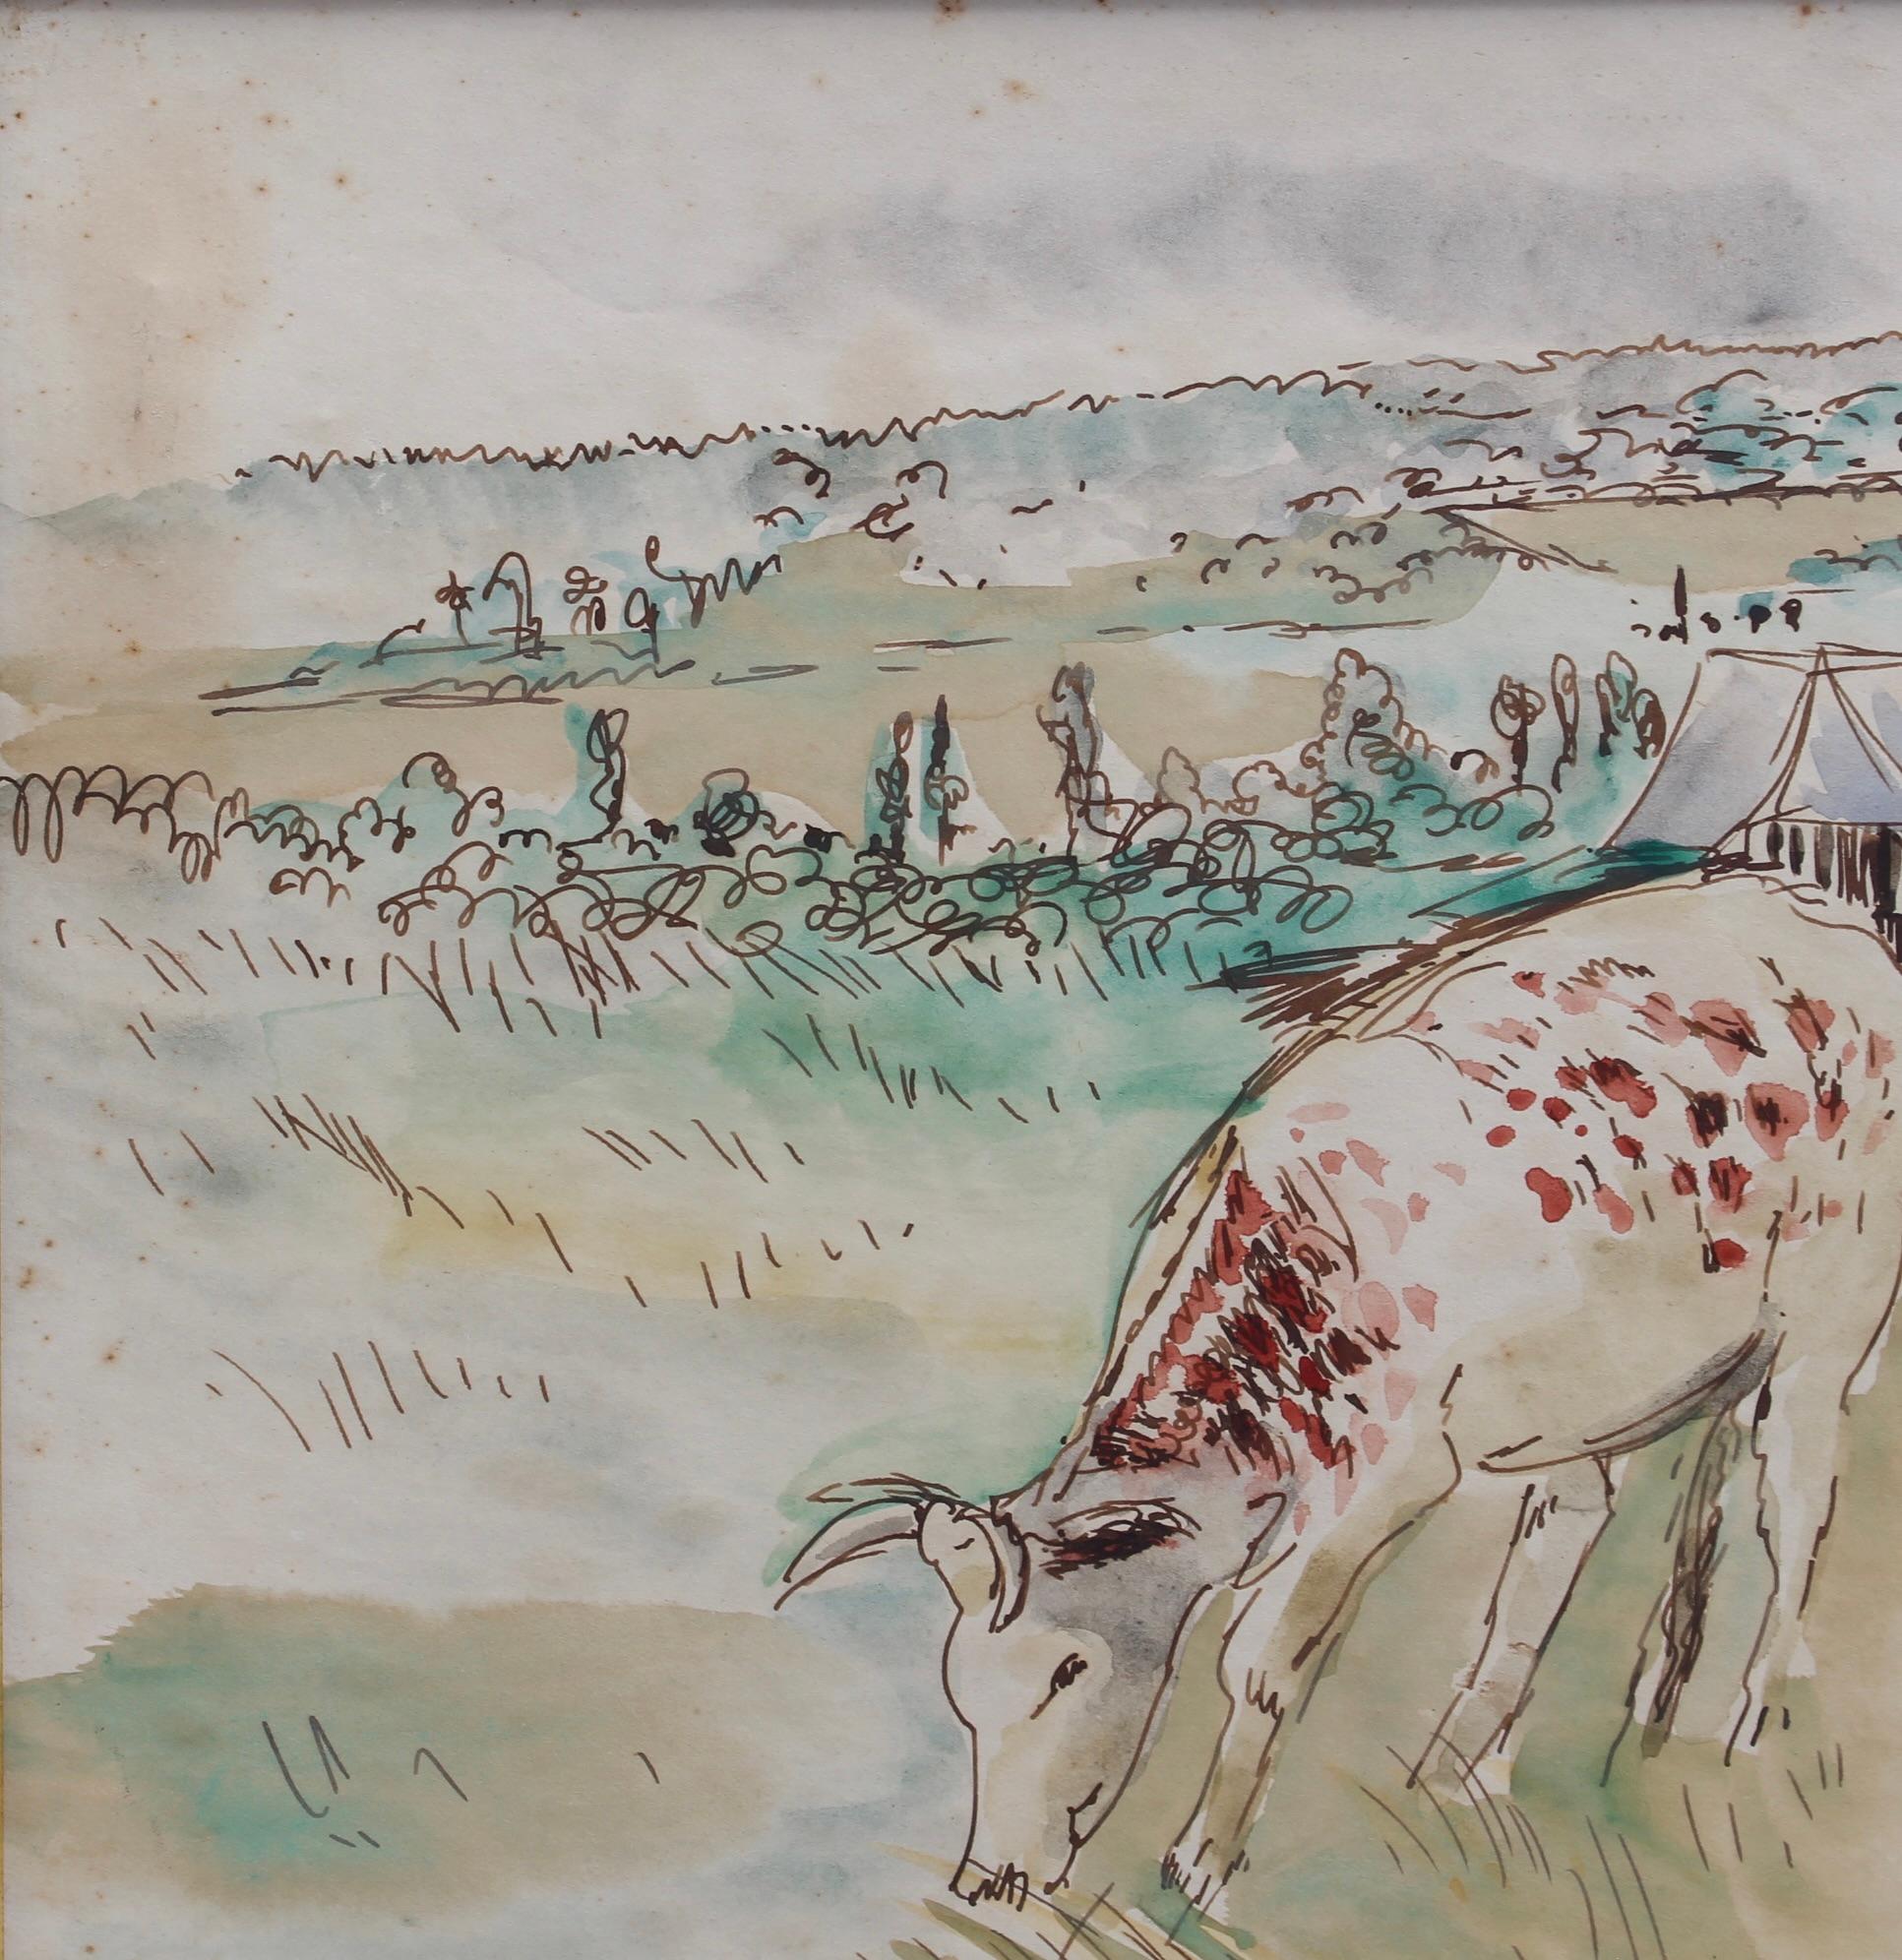 'Grazing Cattle in Normandy', watercolour on paper, by Genevieve Gallibert (circa 1930s). The artists captures a tranquil scene in Vallée d'Auge, Normandy, which has a typical landscape of the area known for its dairy and apples. It is particularly